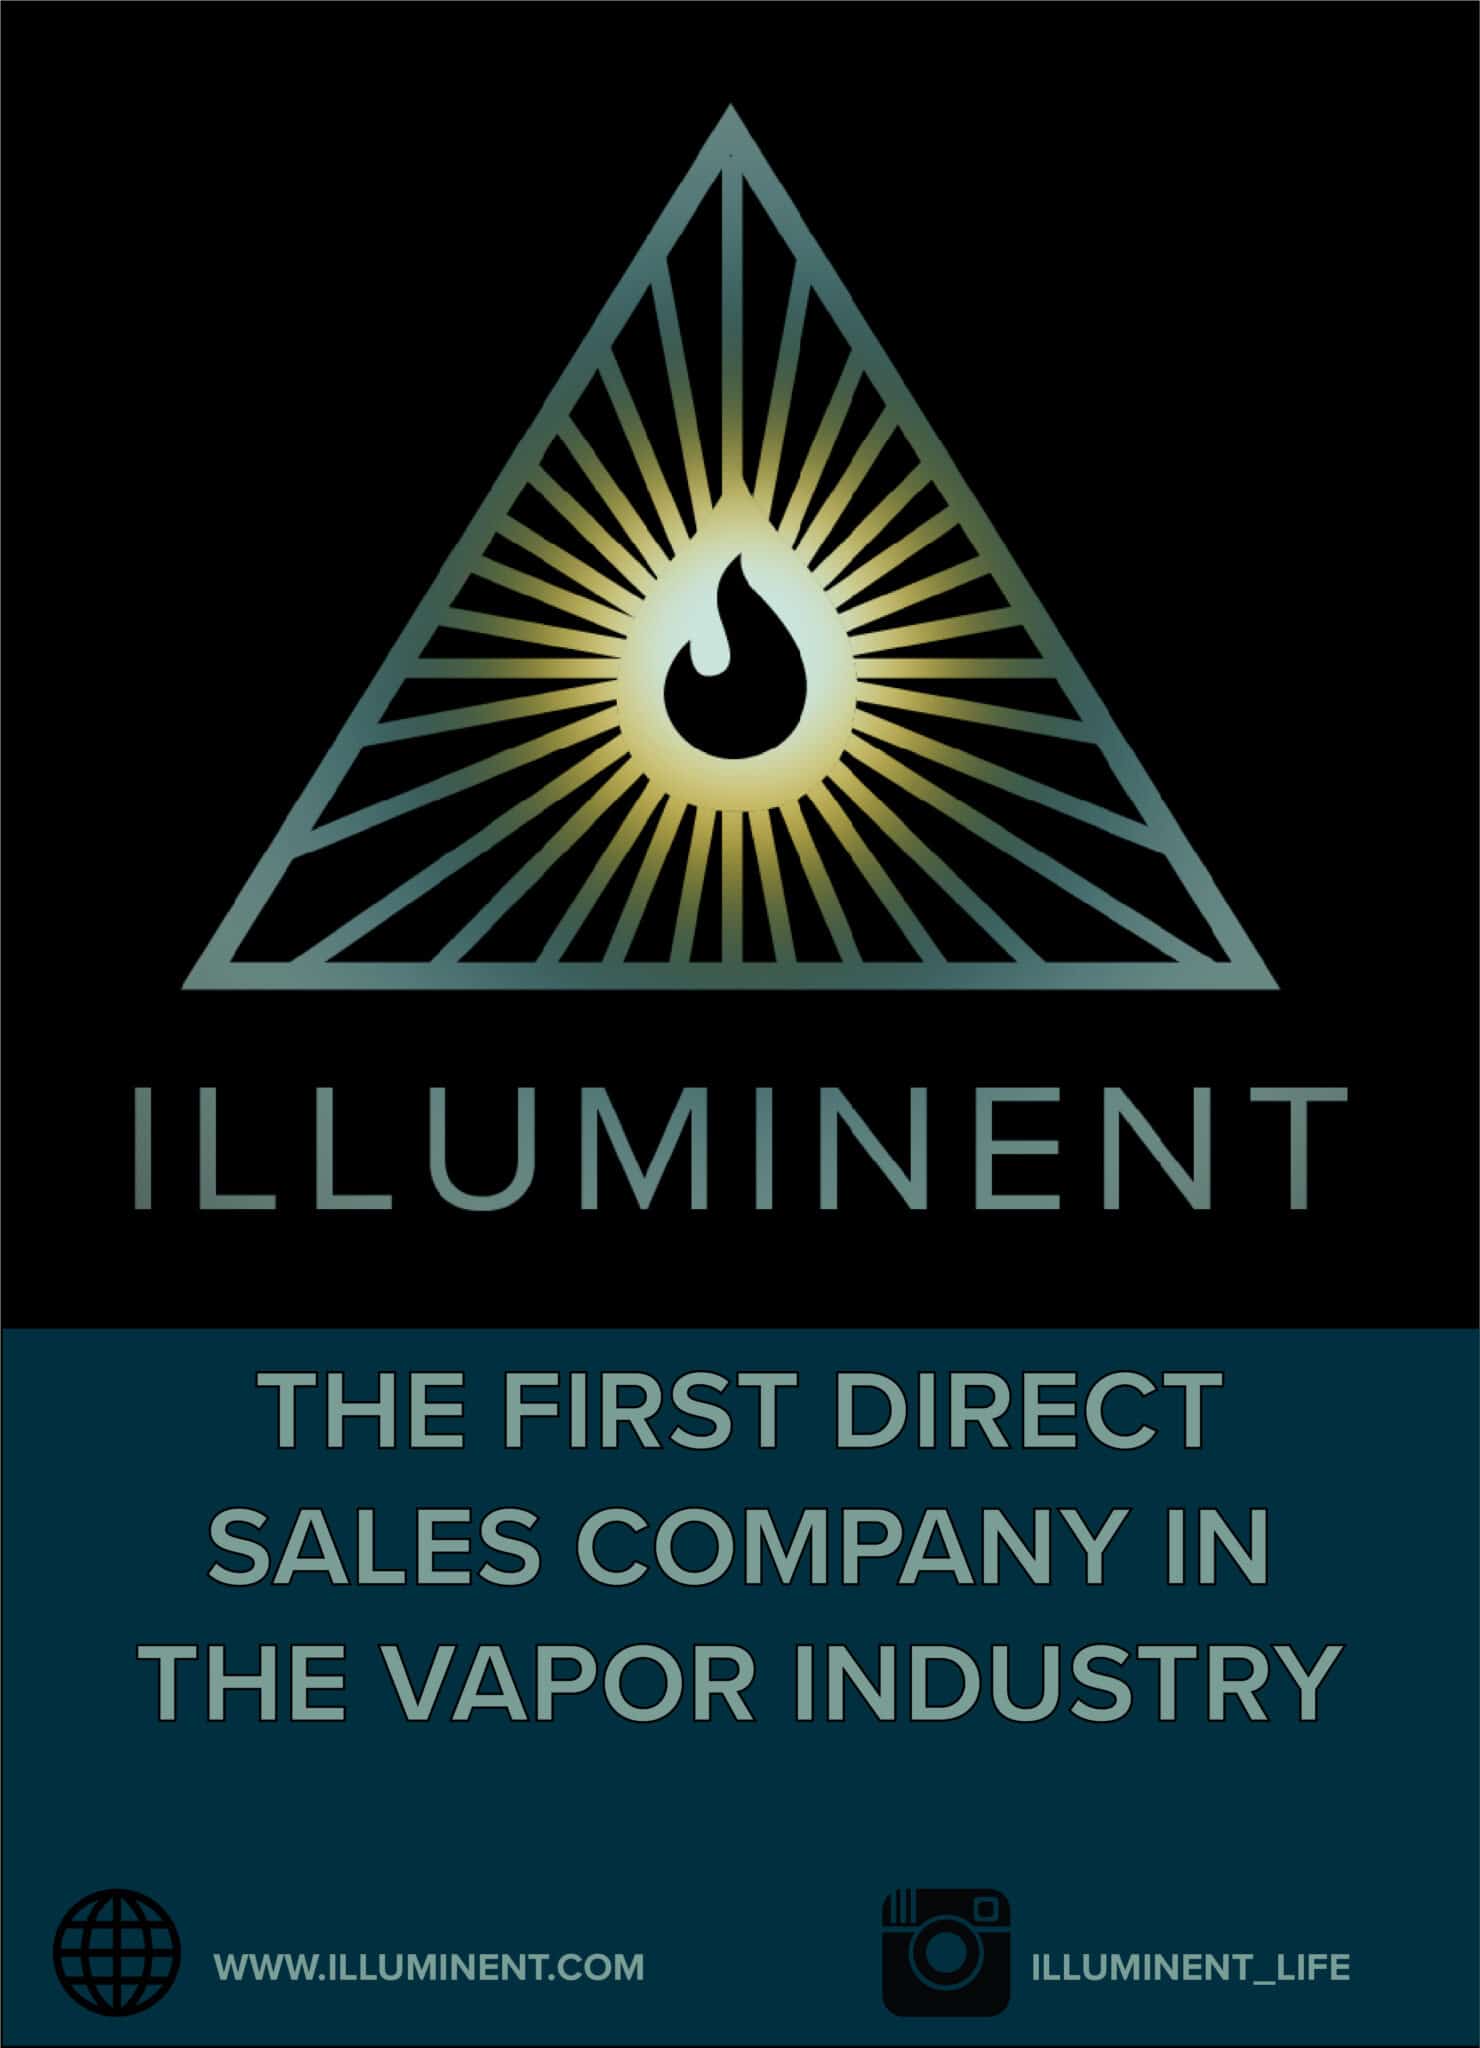 Illuminent CBD Line Products and Home Business Opportunity